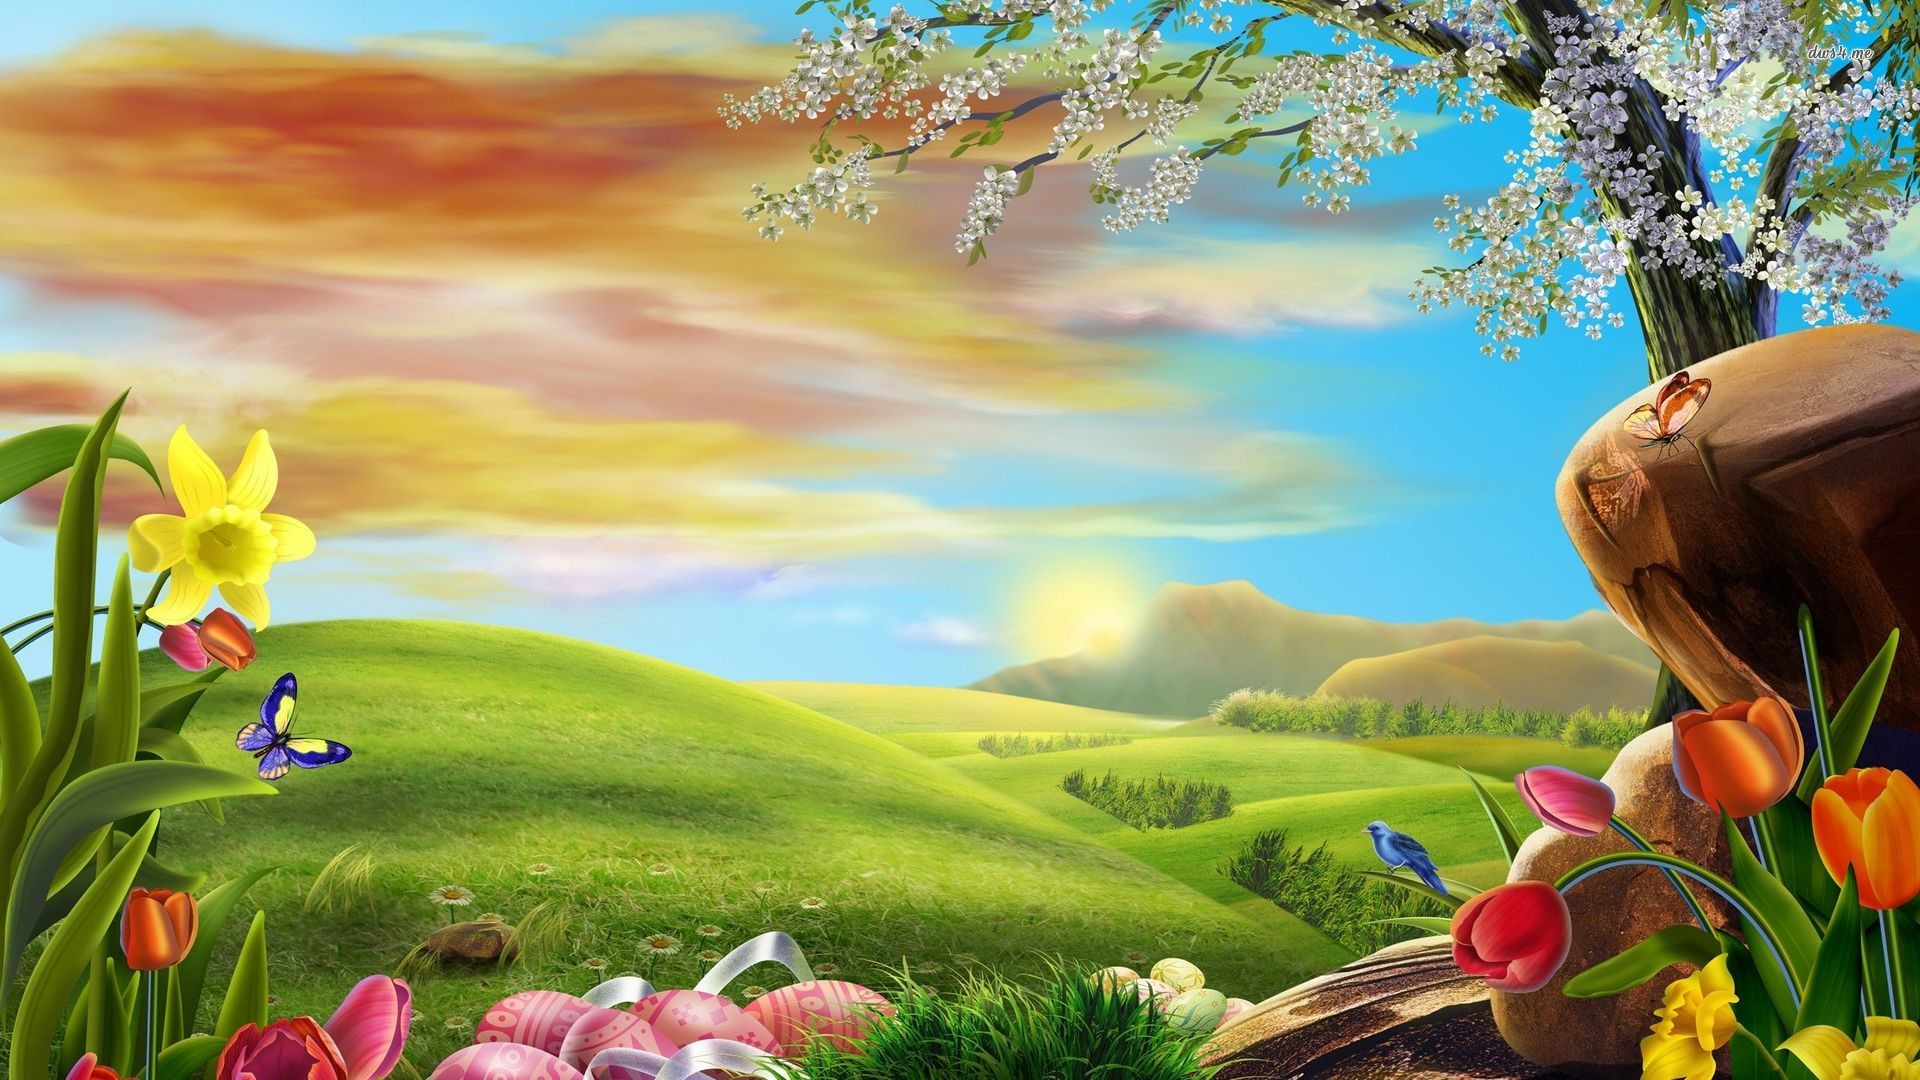 1920x1080 587 Easter HD Wallpapers | Backgrounds - Wallpaper Abyss | Best .